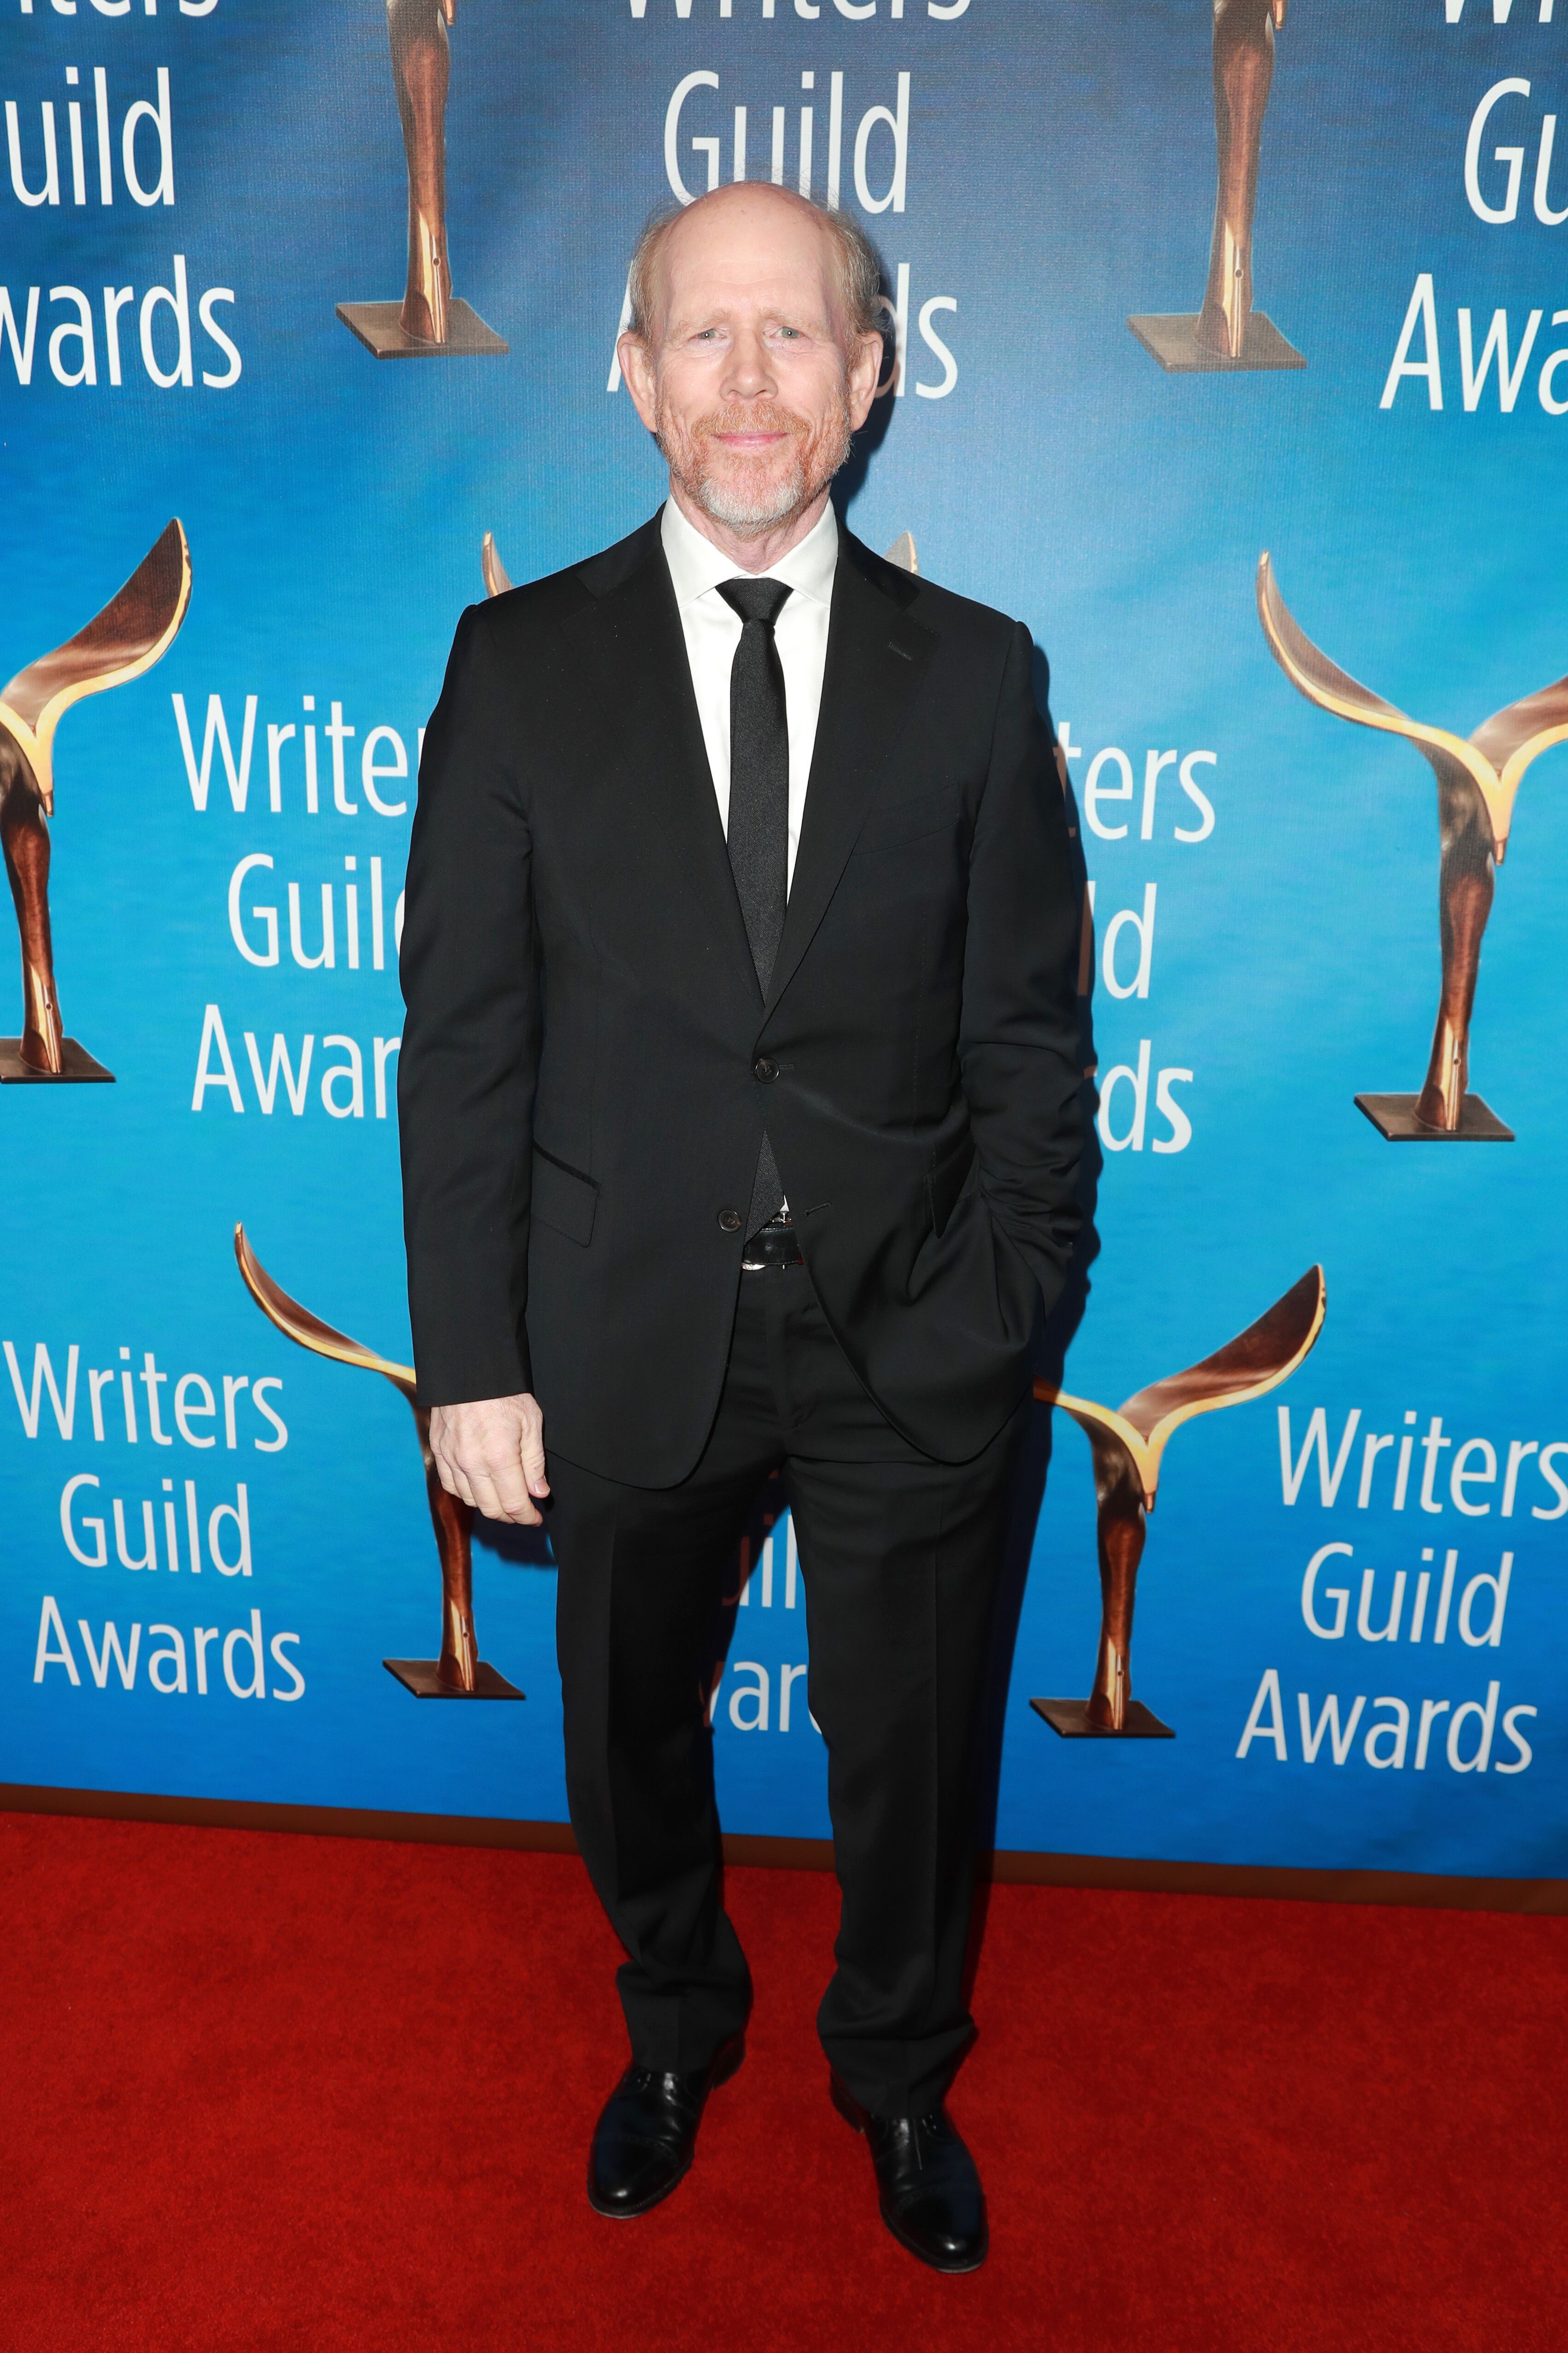 Ron Howard at the 2019 Writers Guild Awards on February 17, 2019. | Source: Getty Images 